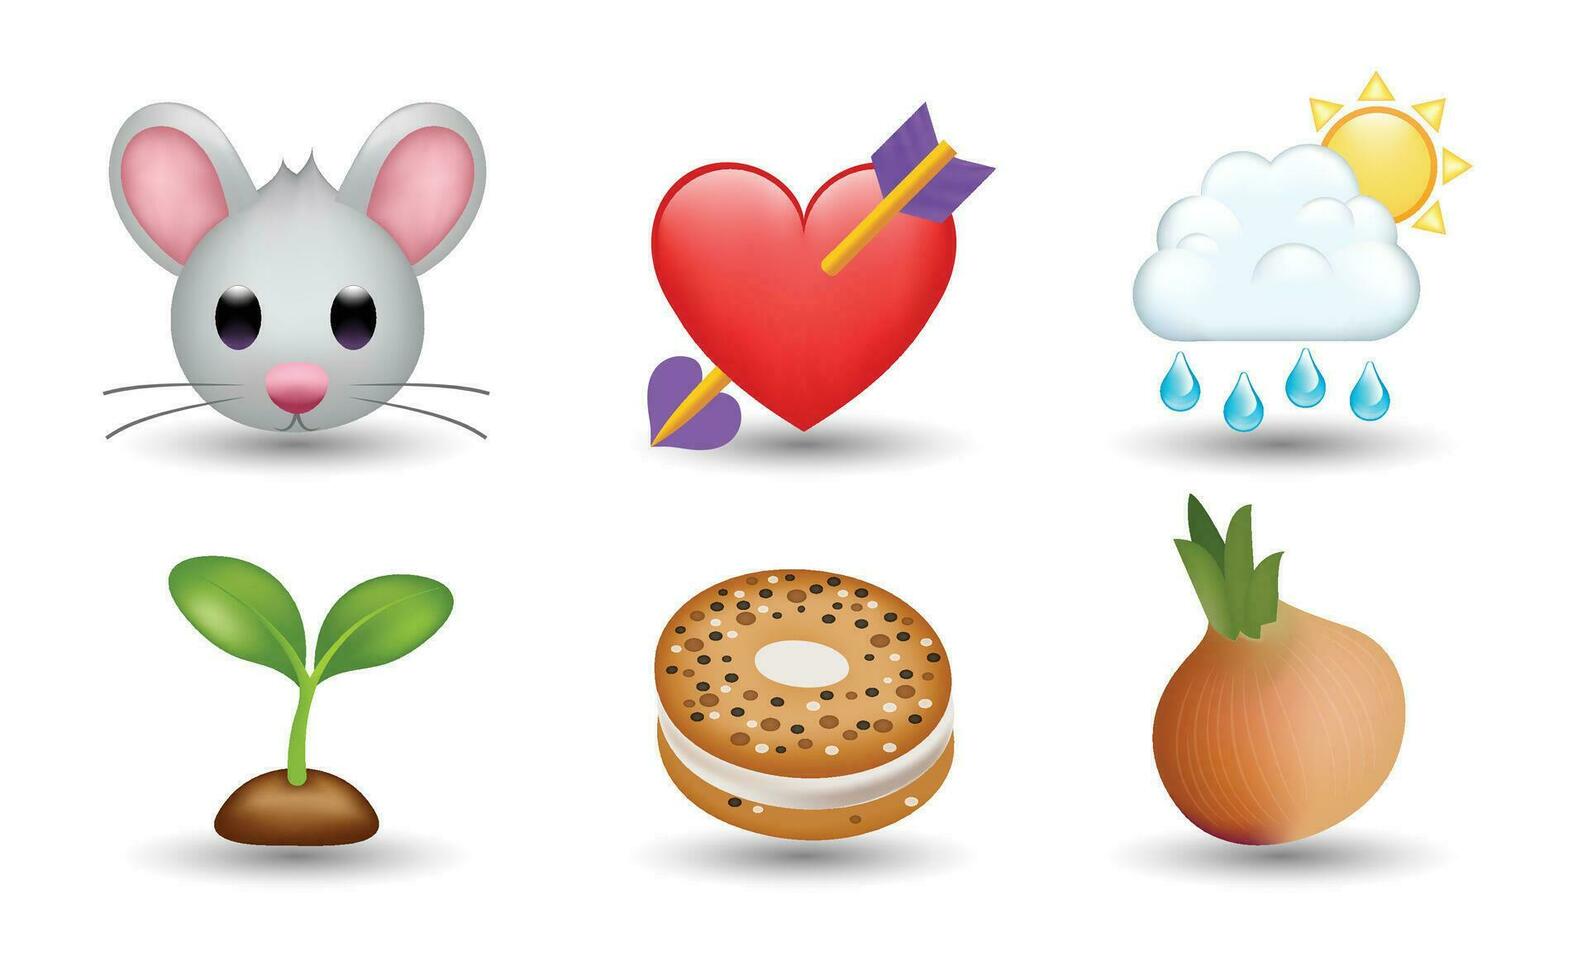 6 Emoticon isolated on White Background. Isolated Vector Illustration. Mouse, red heart with arrow, cloud with and rain, growing plant, chocolate donut, onion vector emoji. 3d Illustration.